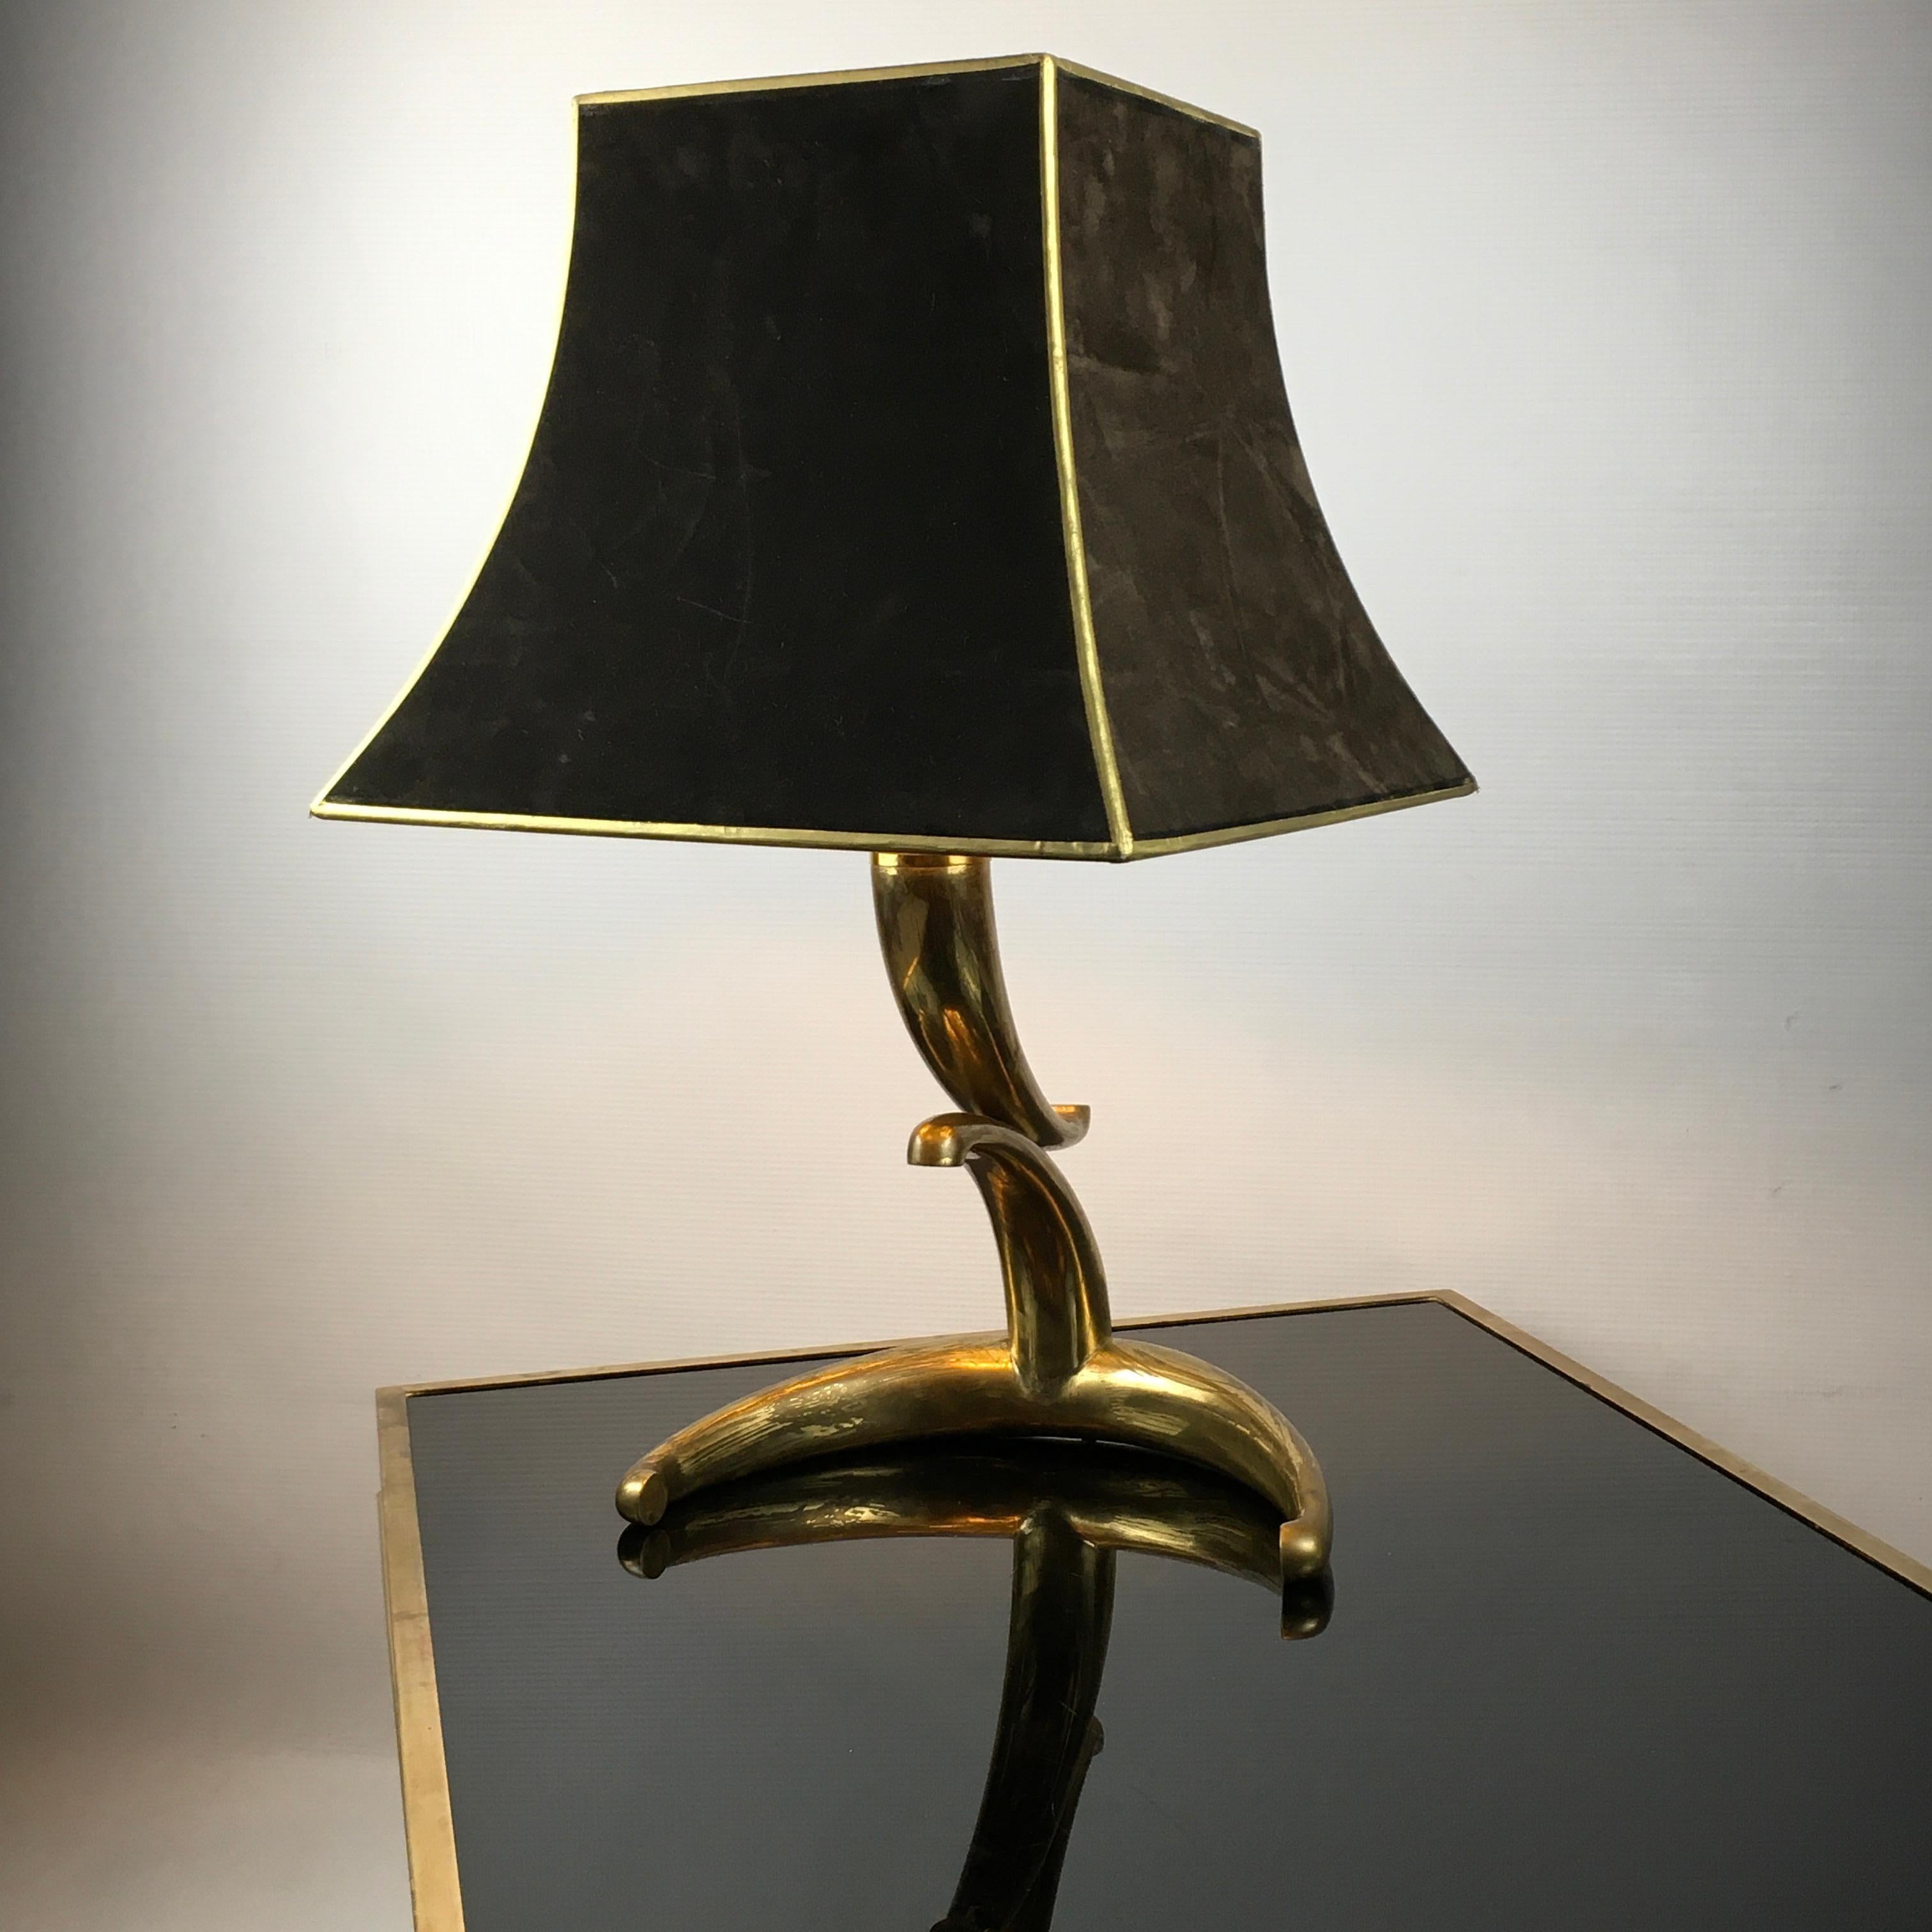 1970s Table Lamp in Solid Brass Horns Shape with Velvet Lampshade, France For Sale 3